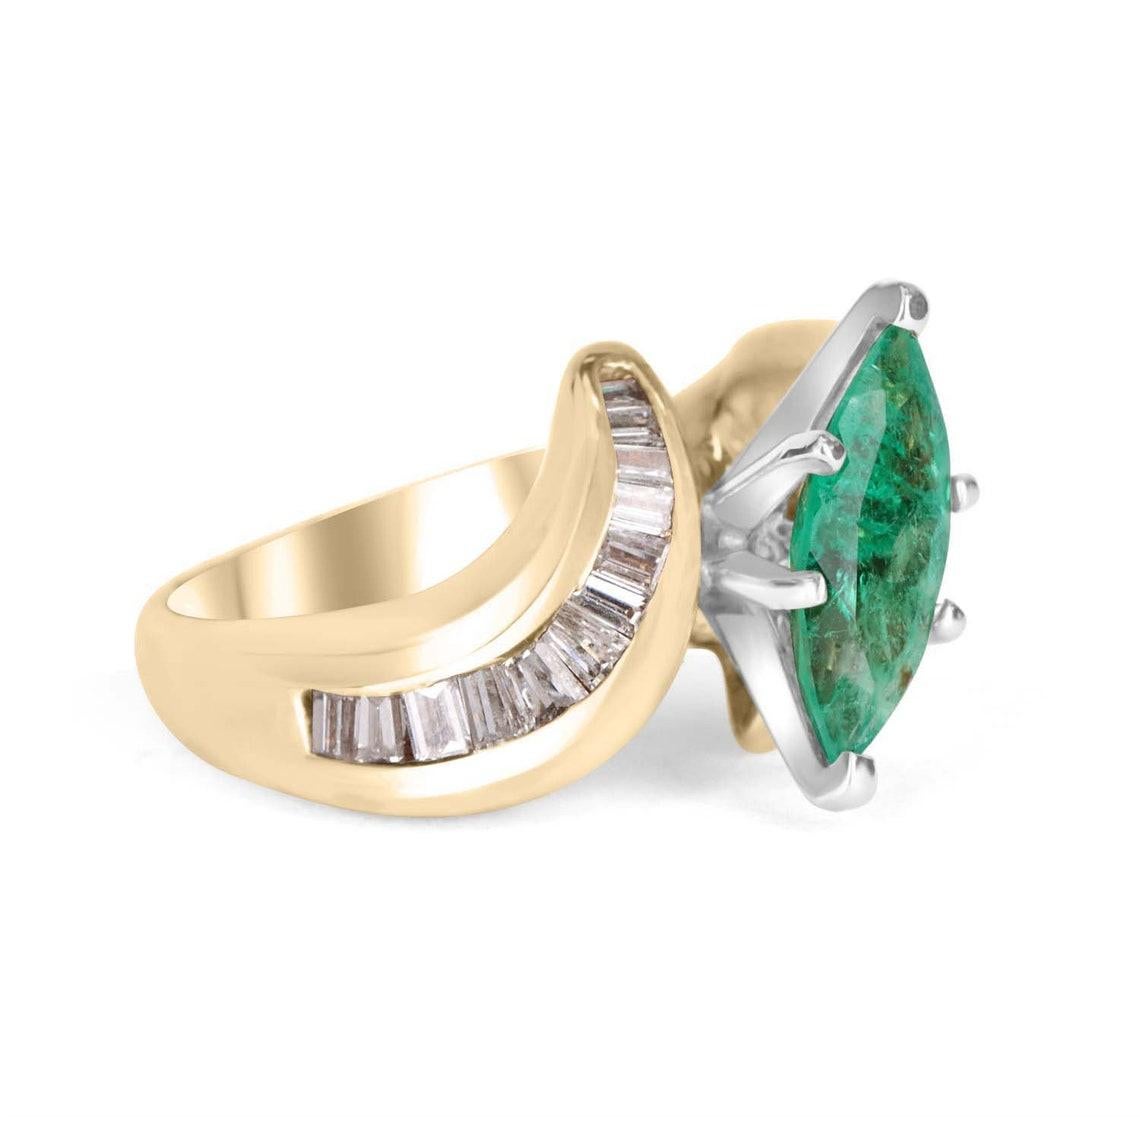 Displayed is a stunning emerald marquise and diamond ring. The center gemstone is an emerald marquise handset in a six-prong setting that allows for a full view of the emerald. Baguette diamonds are channel set on the shank of the ring and cover the